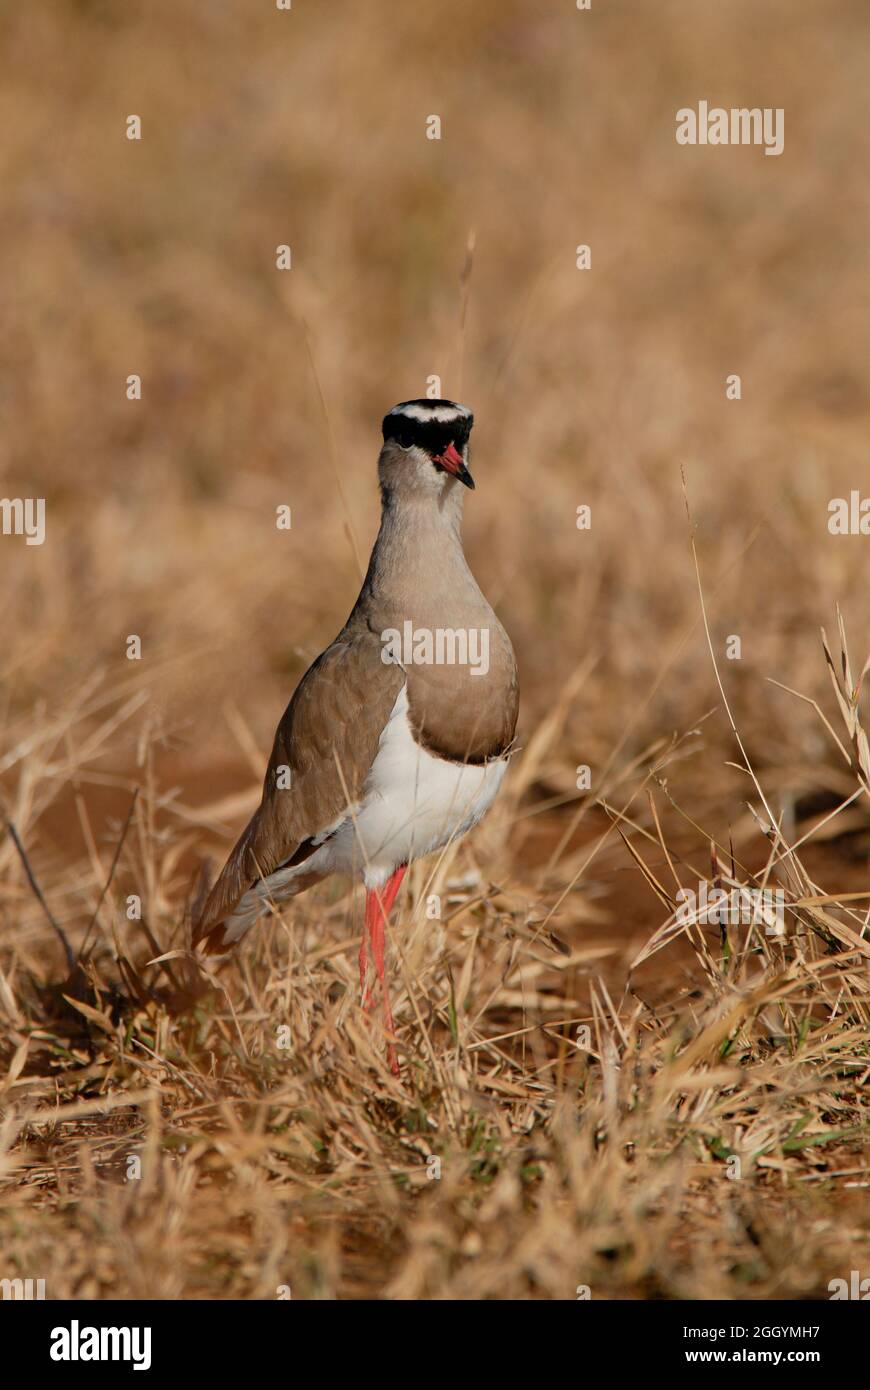 Crowned plover in African savannah, Kruger National Park, South Africa. Stock Photo